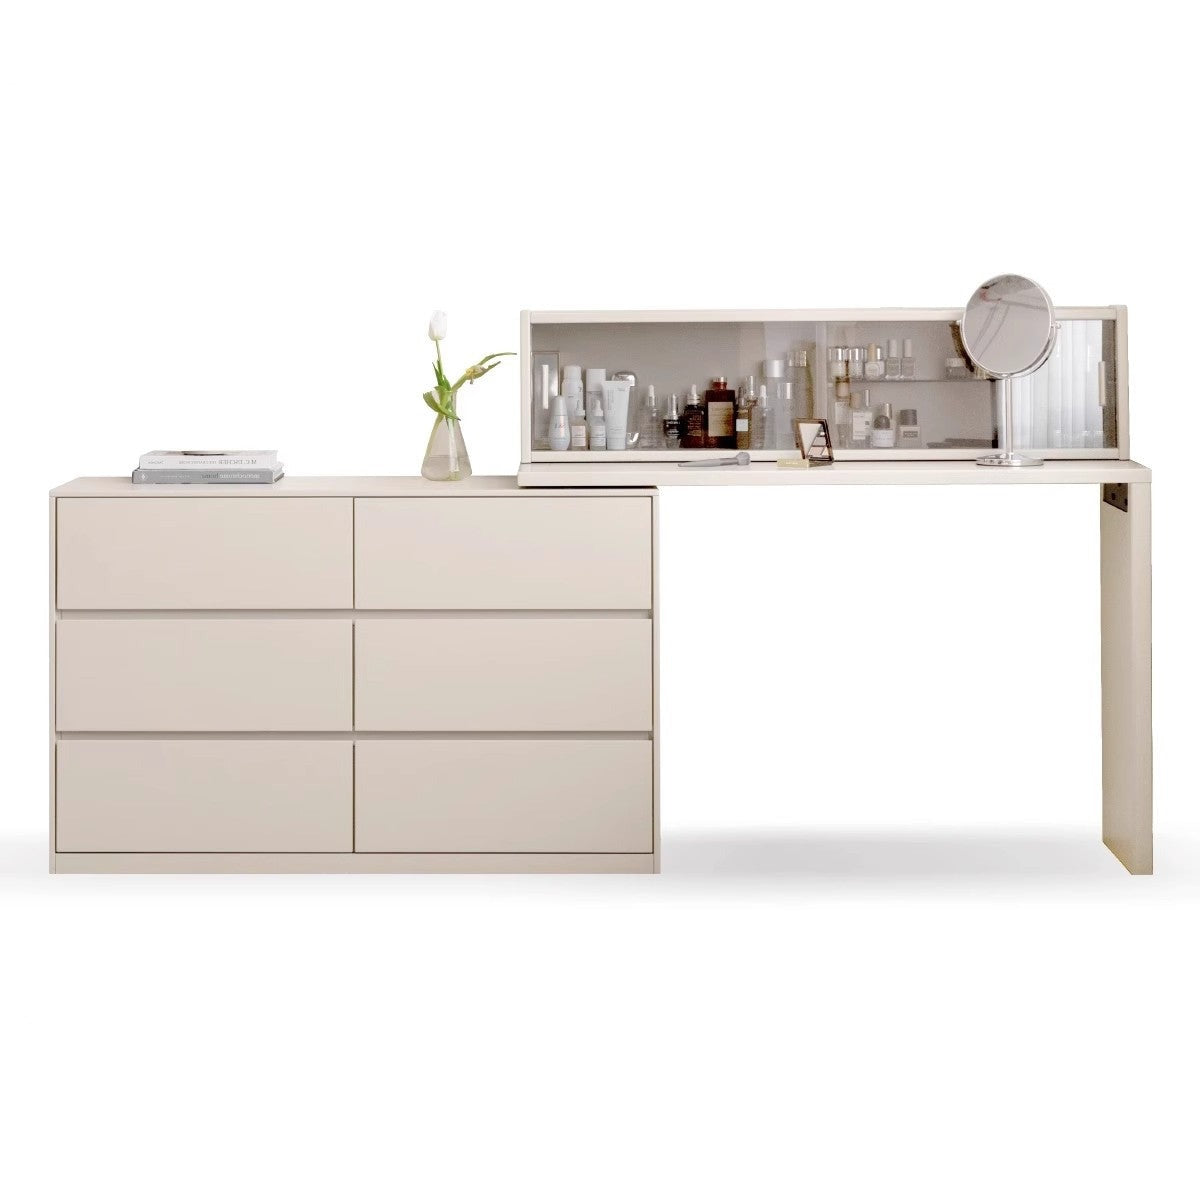 Poplar solid wood dressing table cream style integrated simple drawer